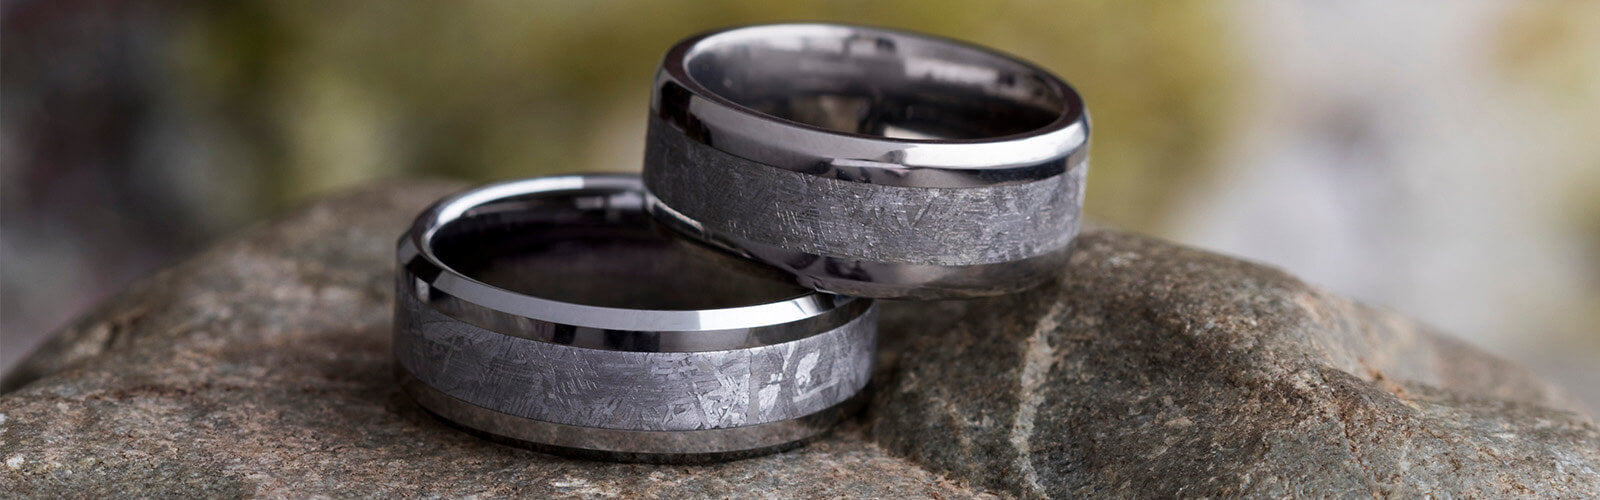 Rings with Beveled Profiles